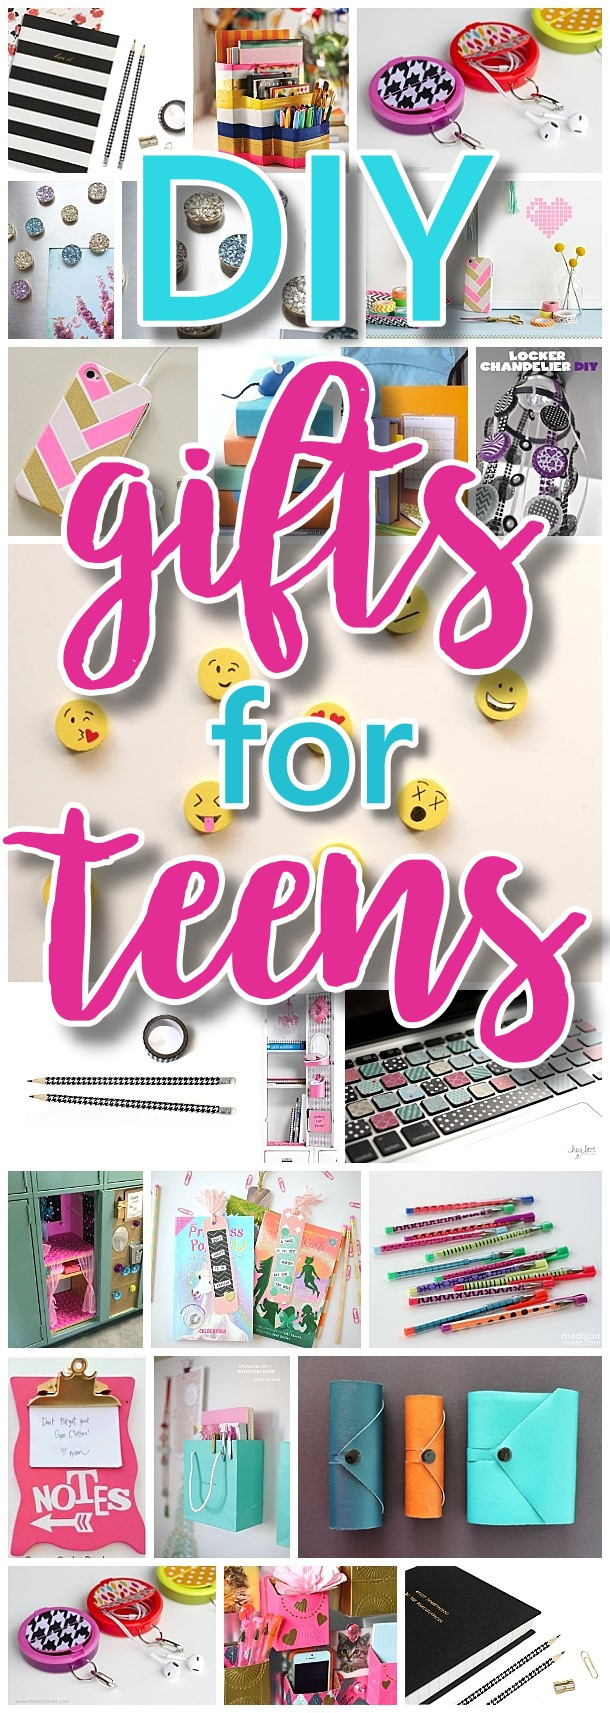 DIY Christmas Gifts For Girls
 The BEST DIY Gifts for Teens Tweens and Best Friends